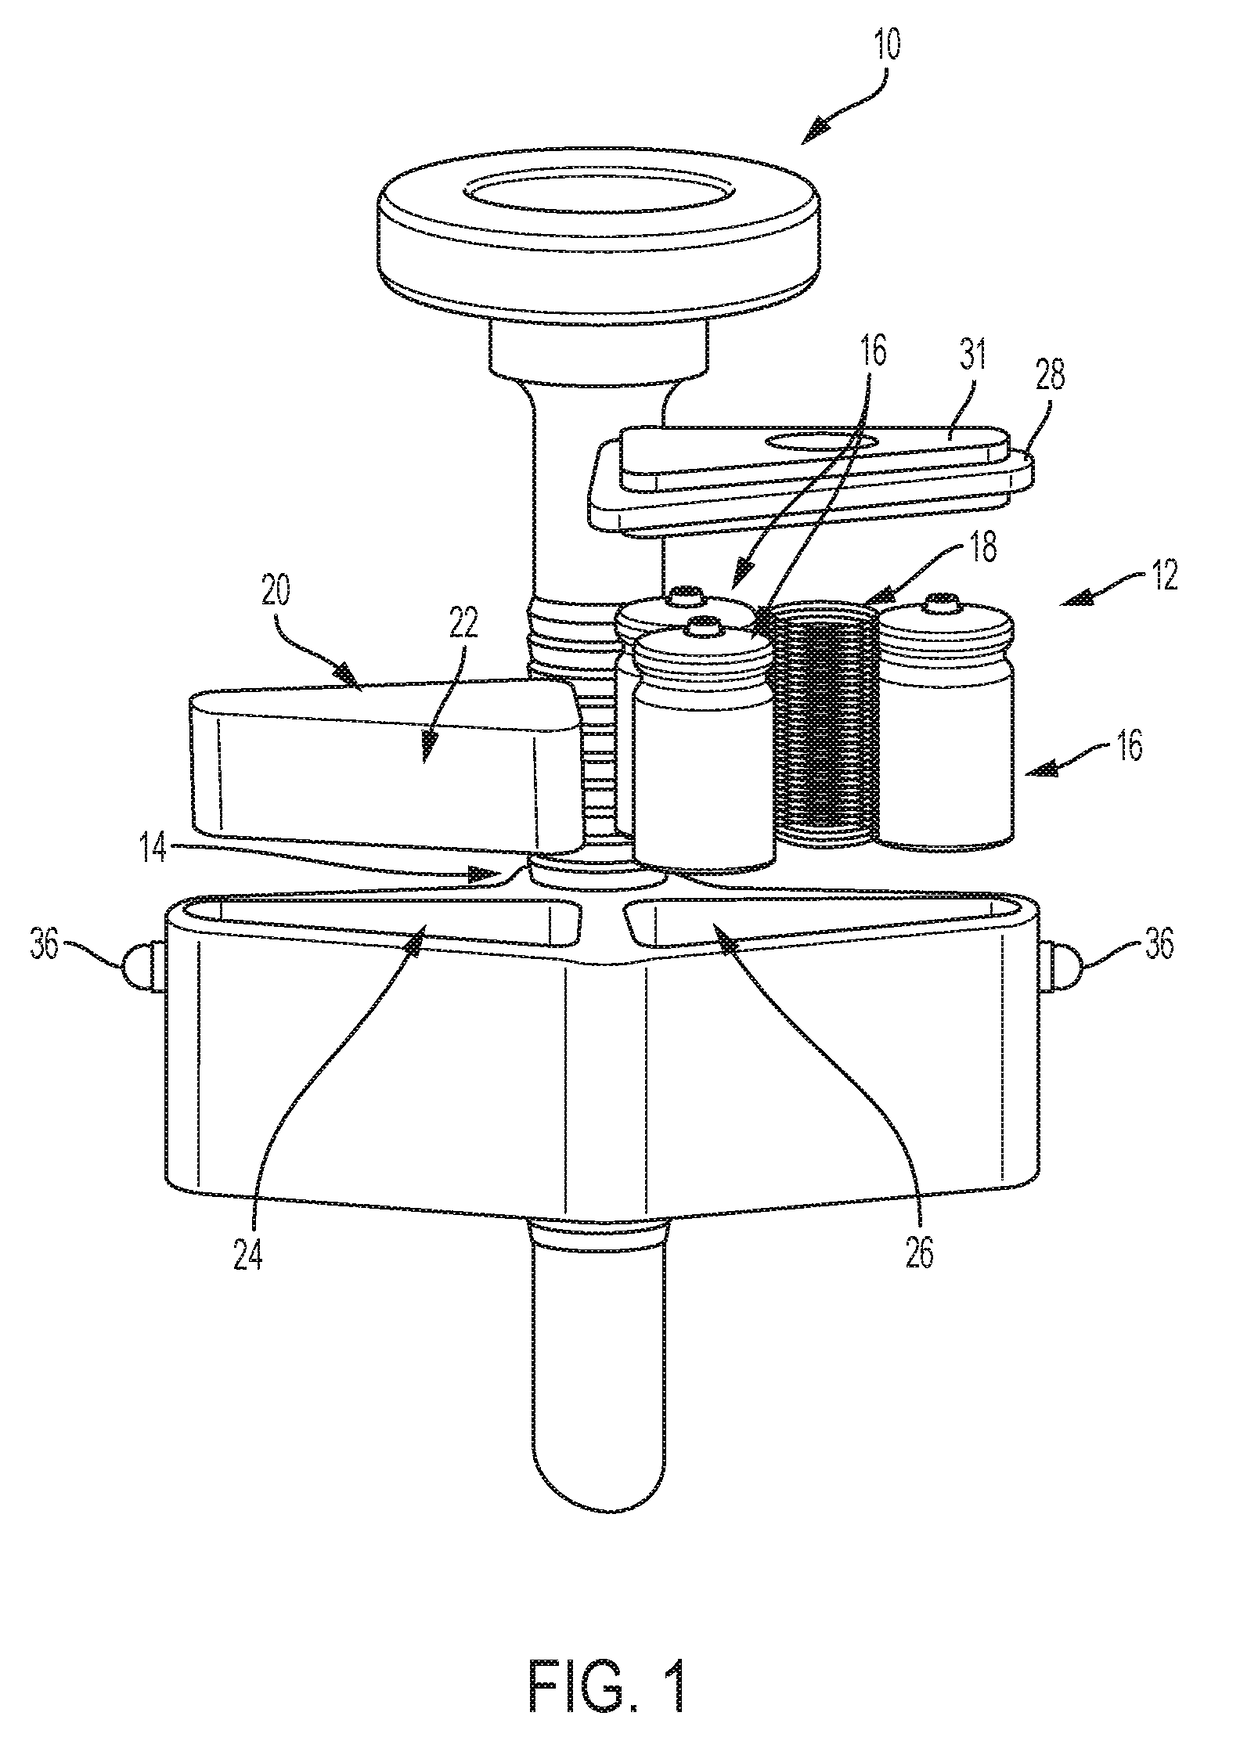 Cleaning device for cleaning a scope, laparoscope or microscope used in surgery or other medical procedures and a method of using the device during surgical or other medical procedures